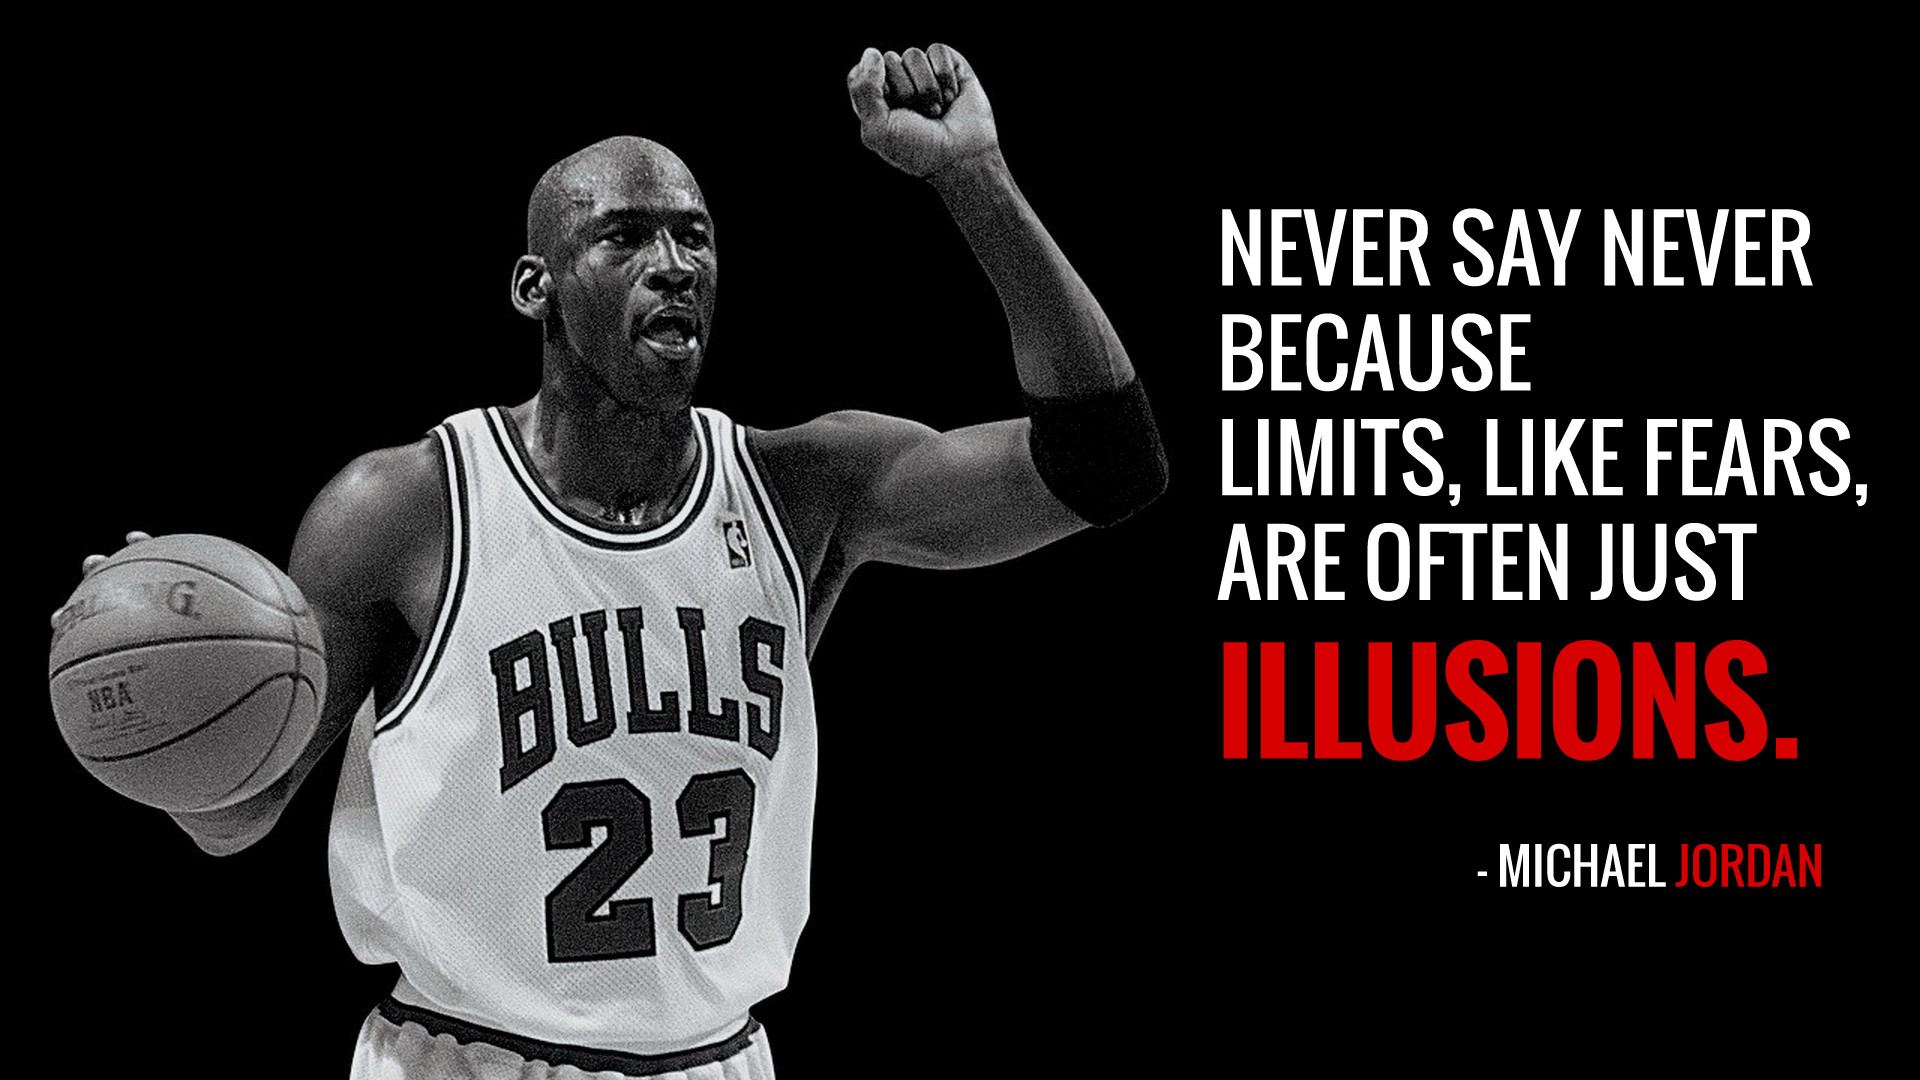 Athletic Motivational Quotes
 15 Inspirational Sports Quotes that will lift your spirits